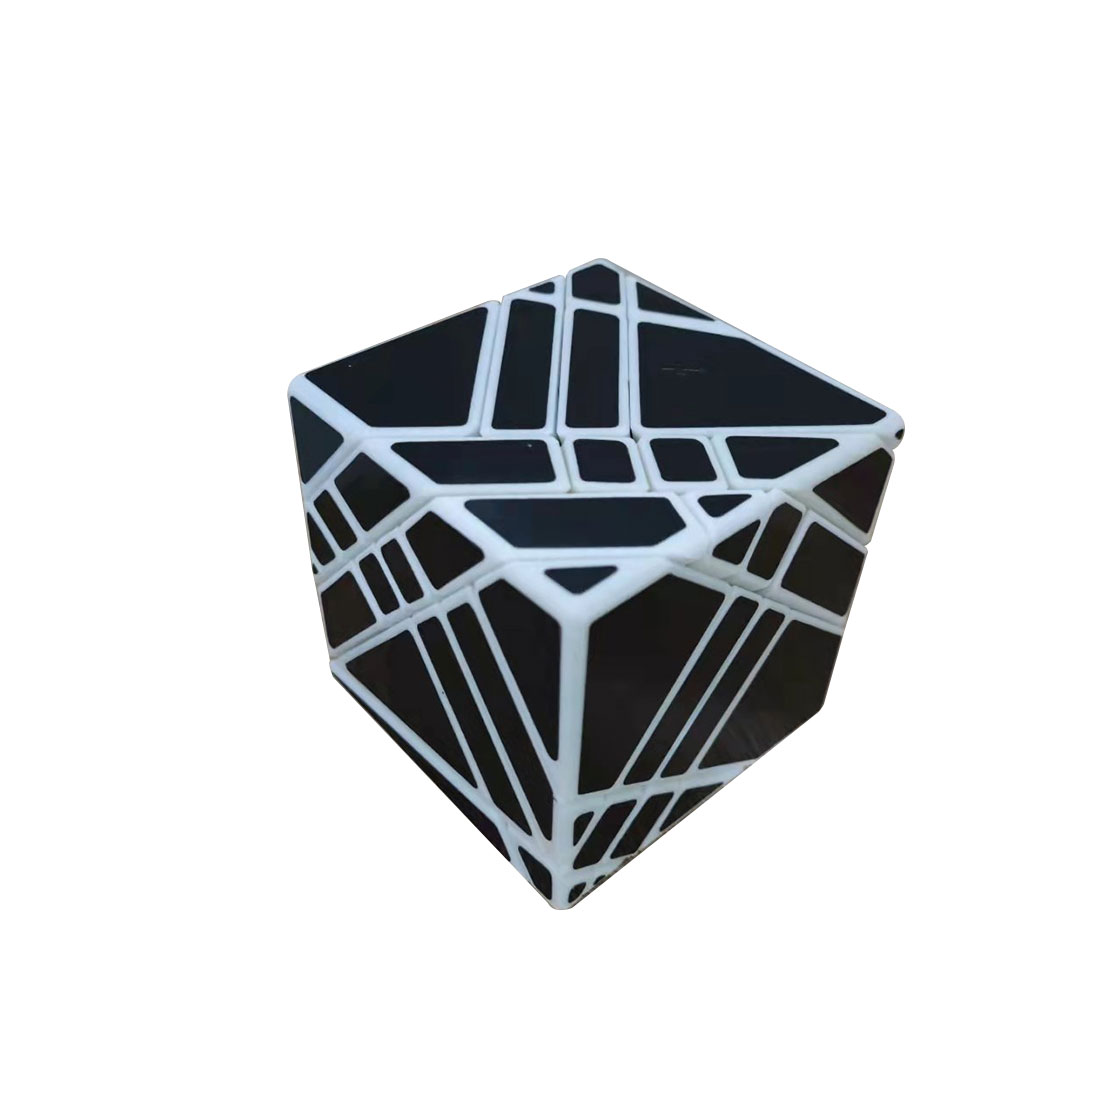 3D Printed 4x4 Ghost Cube